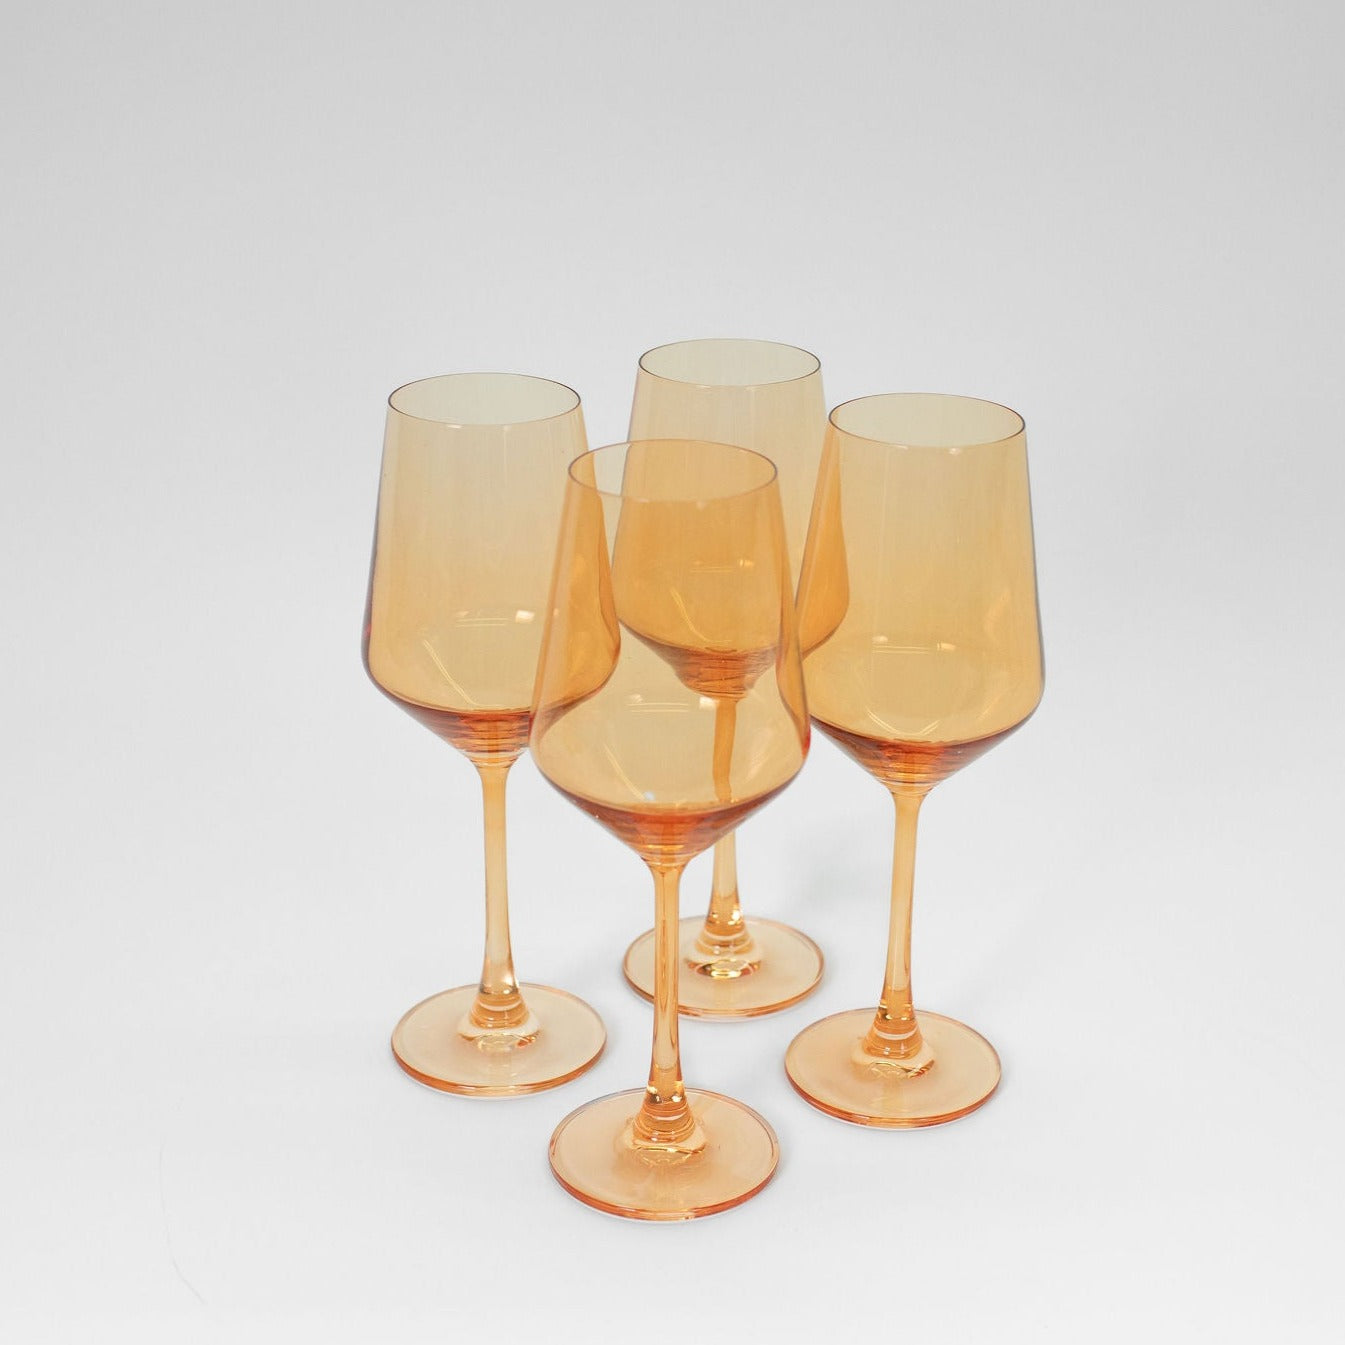 Colored Wine Glasses - Creamsicle Set of 2